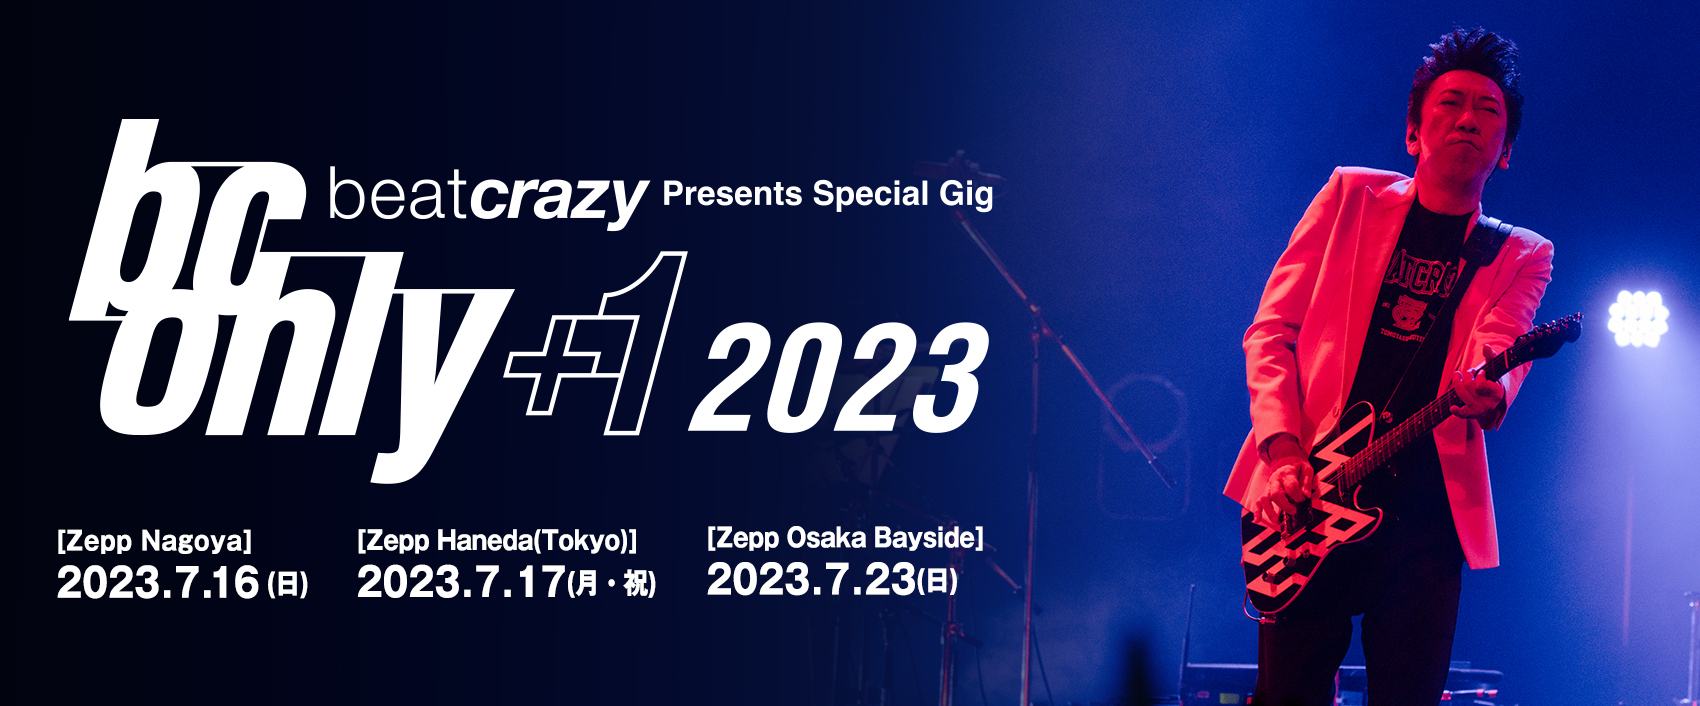 B.C. ONLY +1 2023 | 布袋寅泰 OFFICIAL FANCLUB “beat crazy”